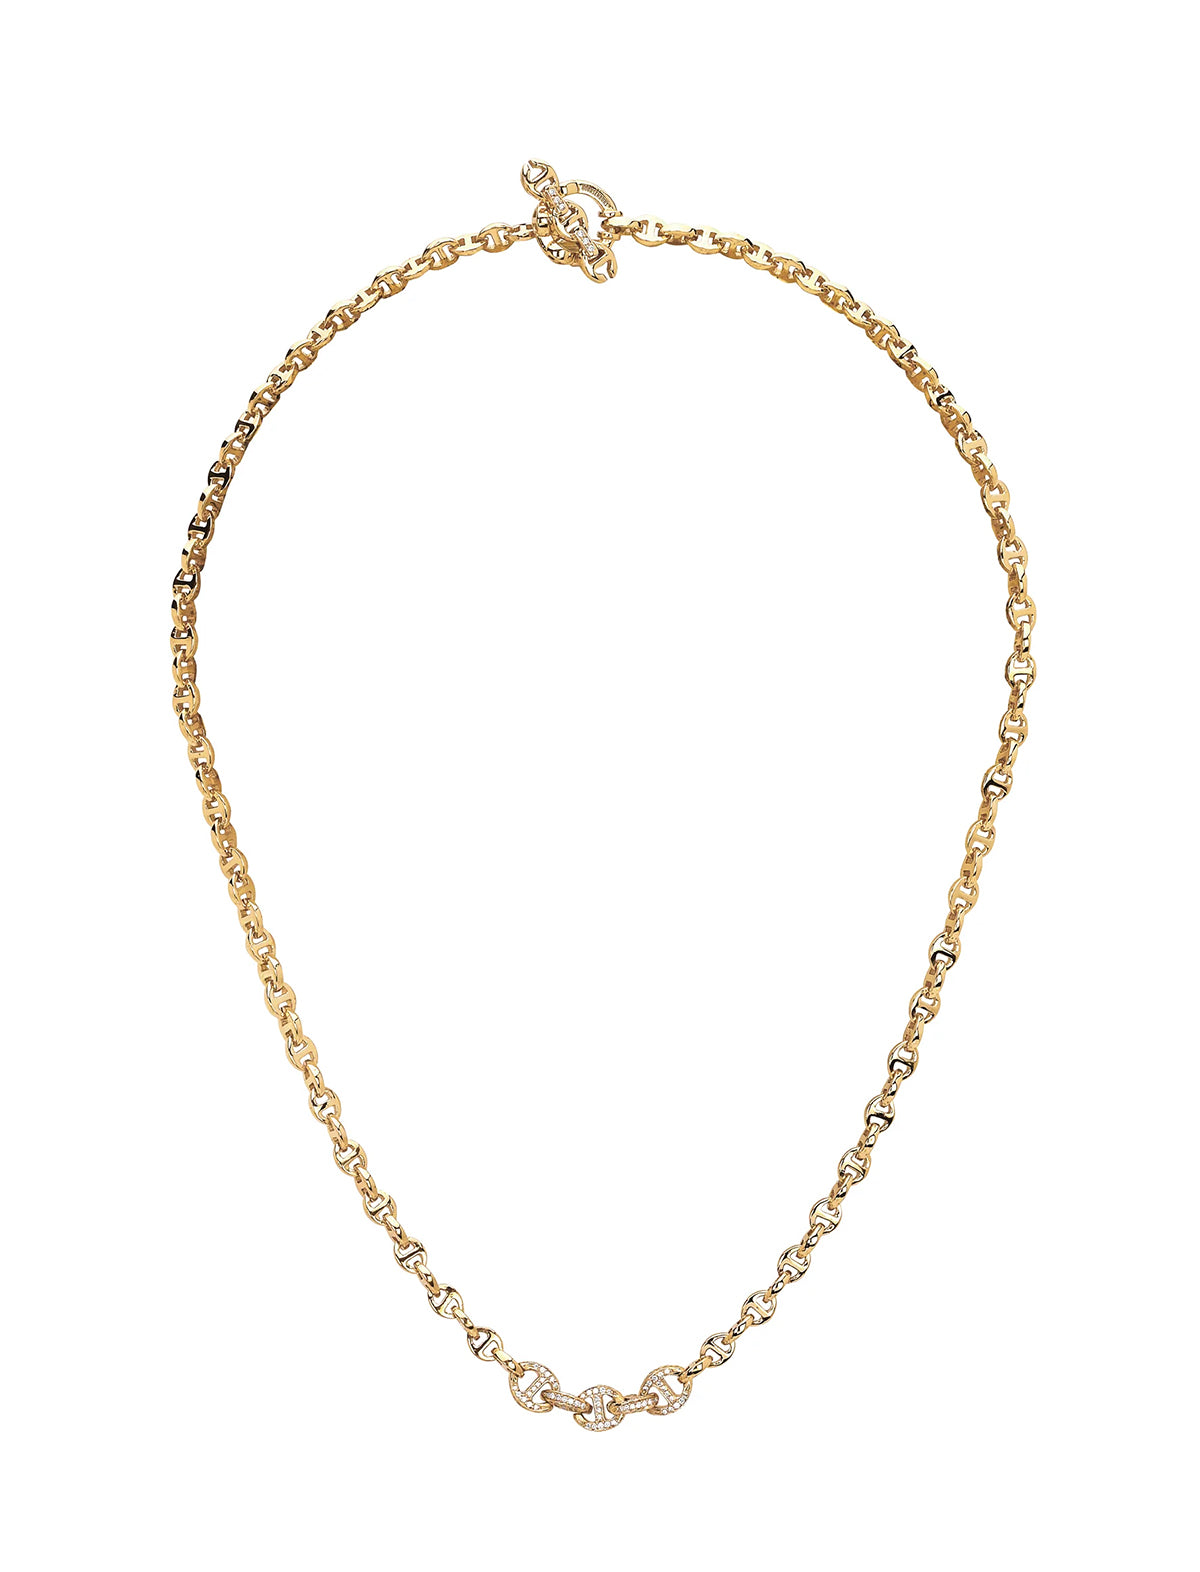 HOORSENBUHS 3mm Open-Link™ Necklace w/ Five Link Pave 18k Yellow Gold